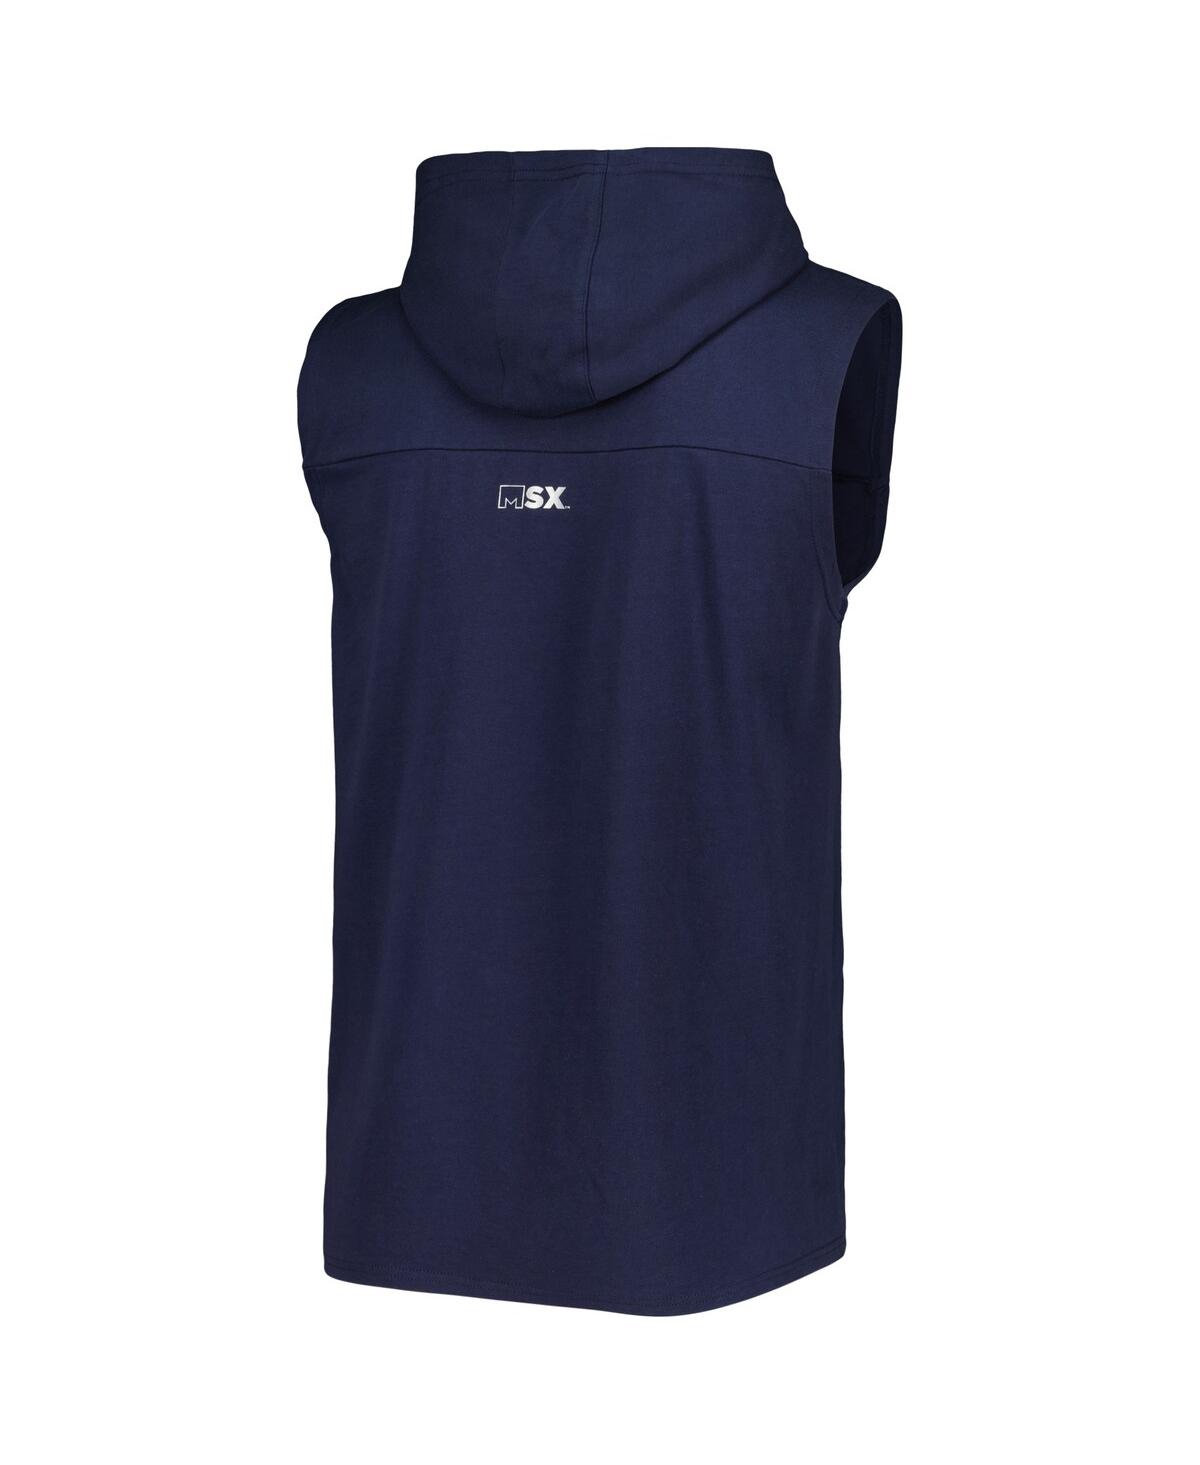 Shop Msx By Michael Strahan Men's  Navy Chicago Bears Relay Sleeveless Pullover Hoodie